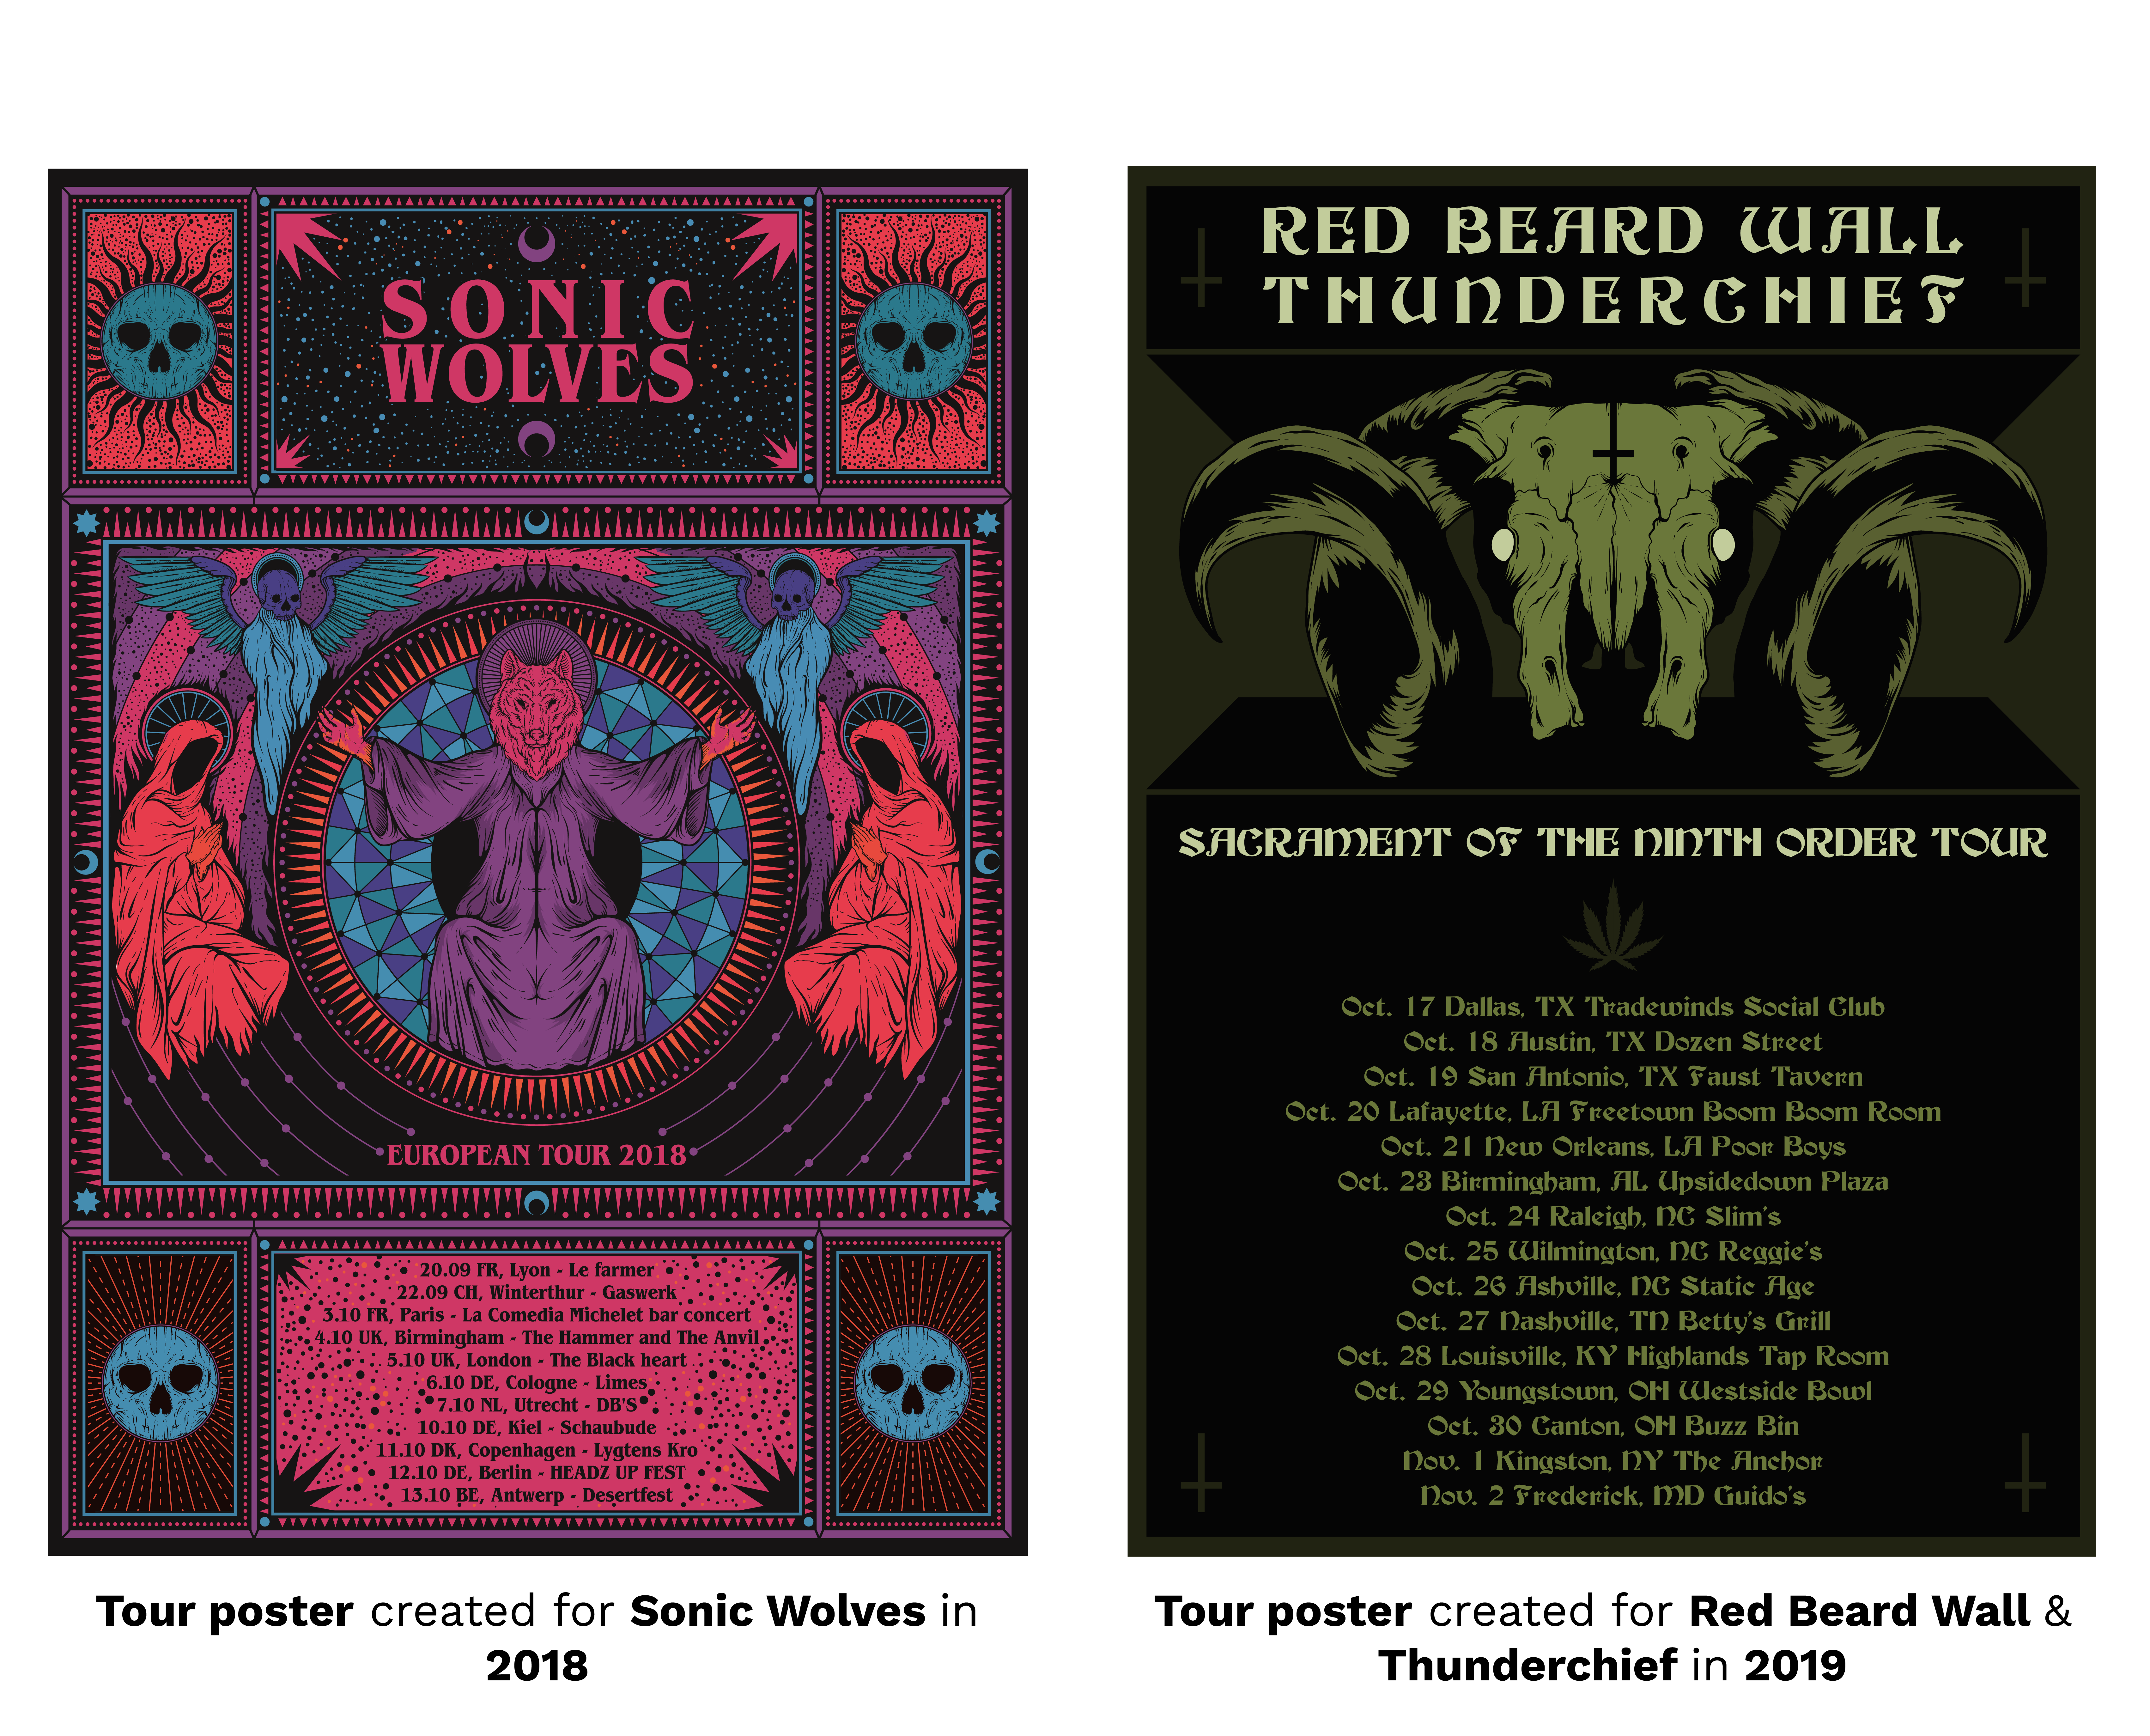 tour poster for sonic wolves and tour poster for red beard wall & tunderchief